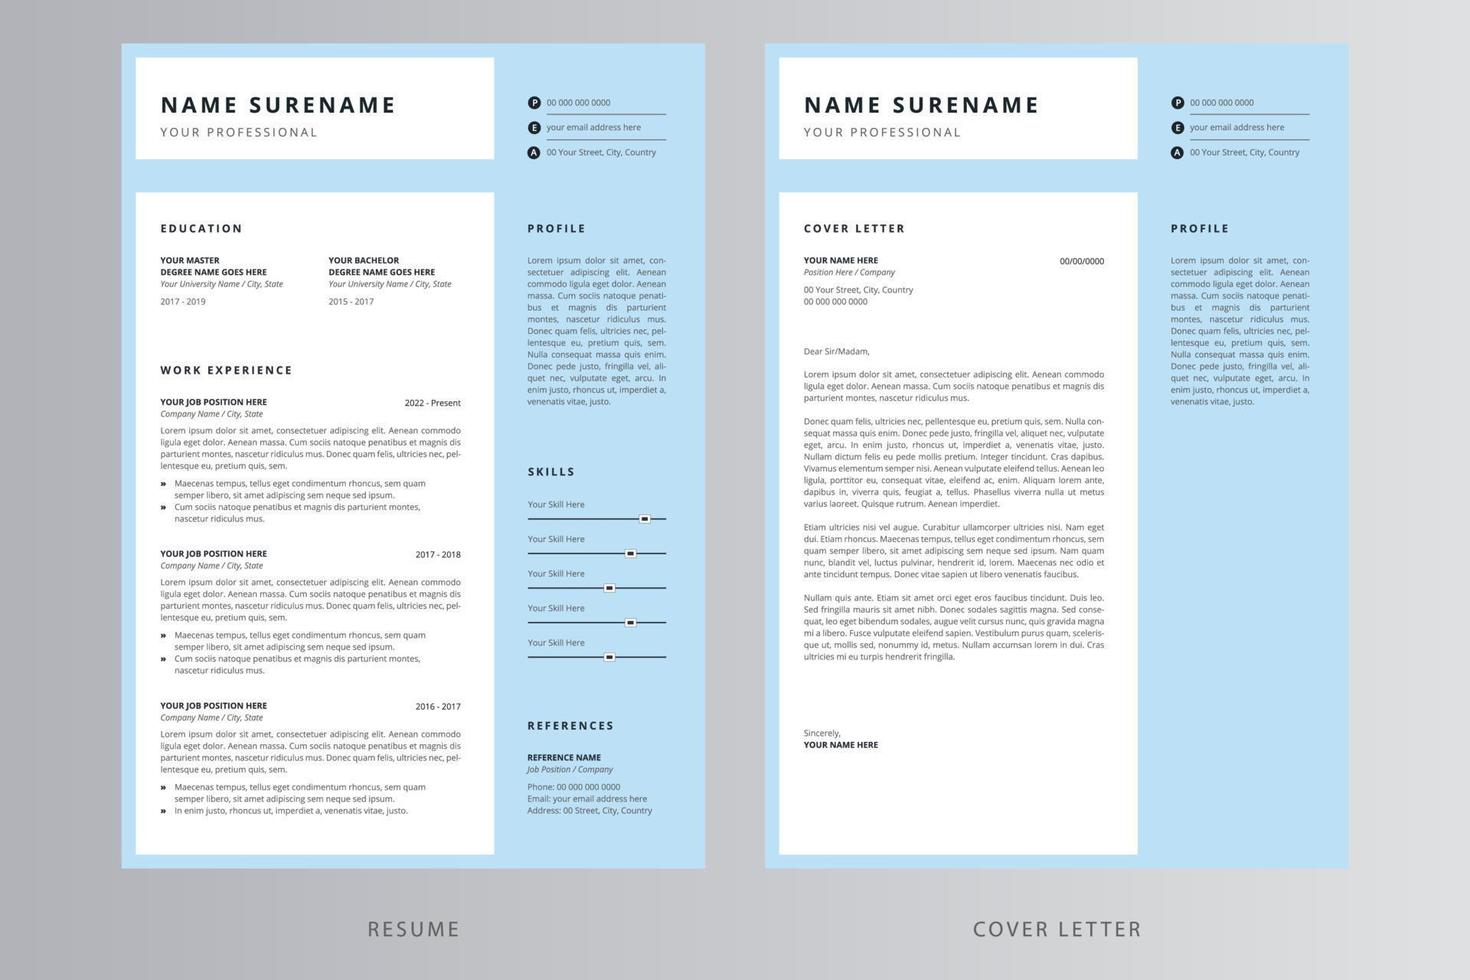 Modern Resume or CV and Cover Letter Template. Pro Vector